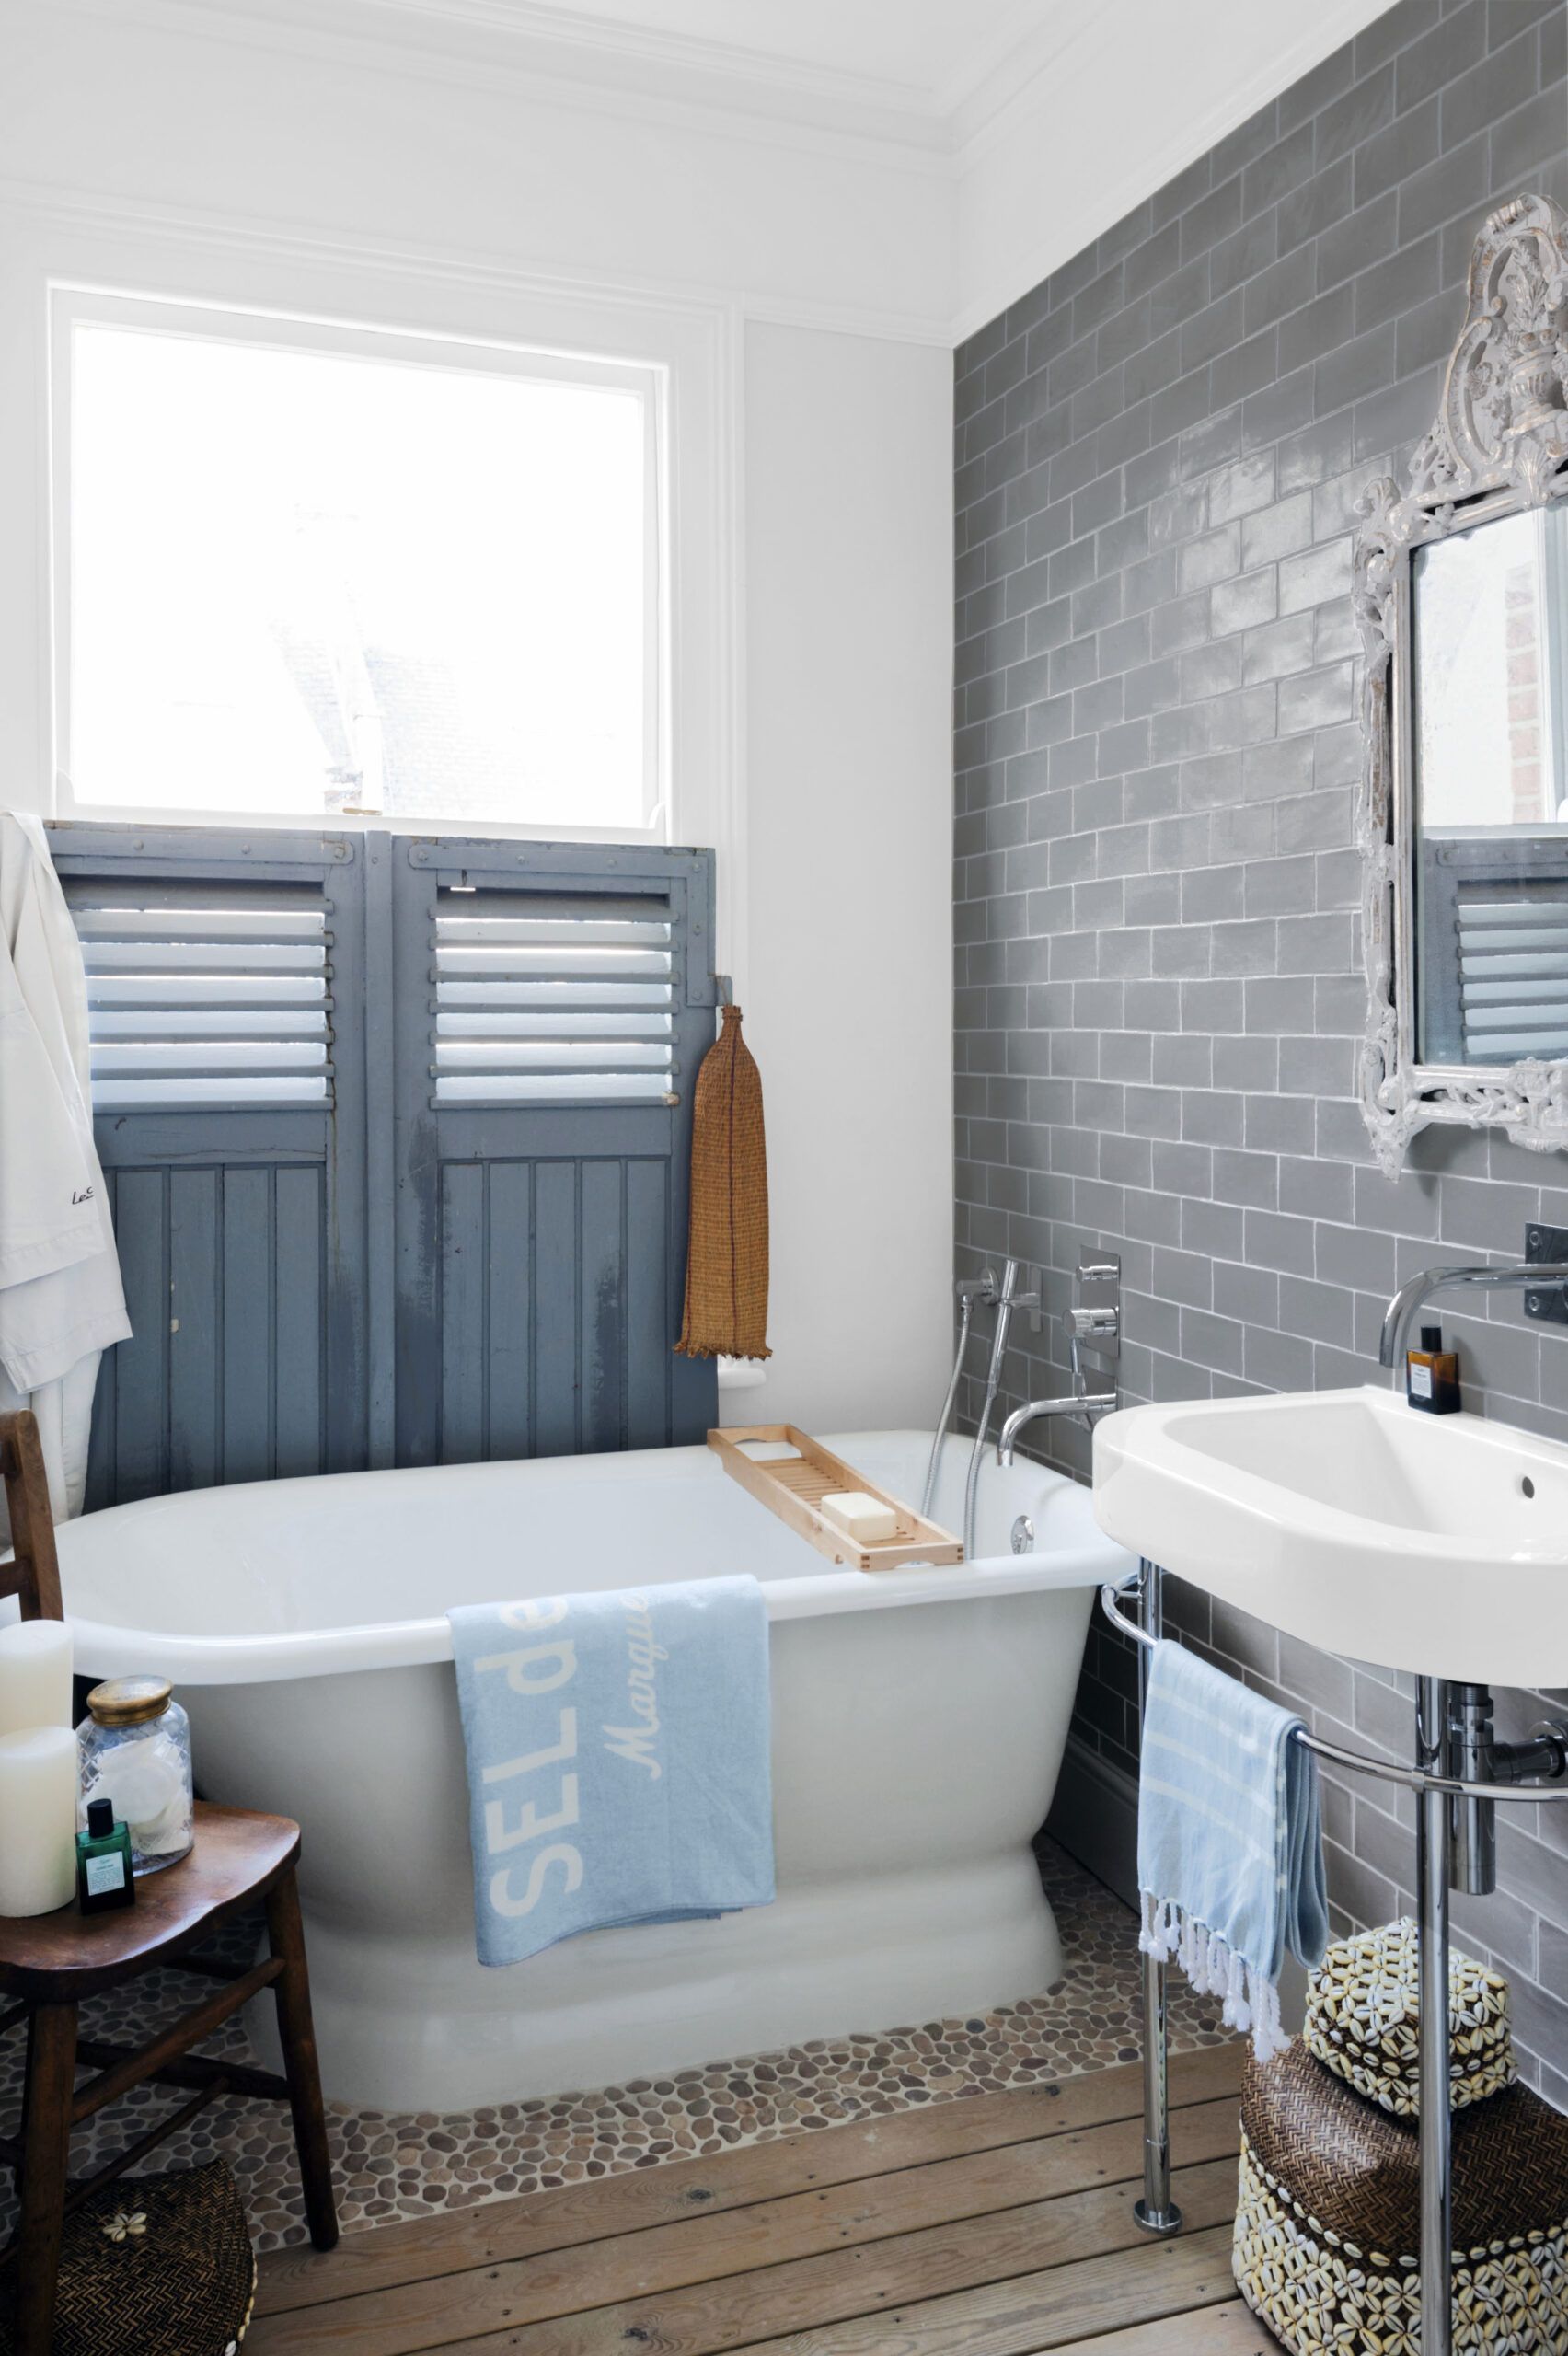 How to Find the Best Budget-Friendly Small Bathroom Storage